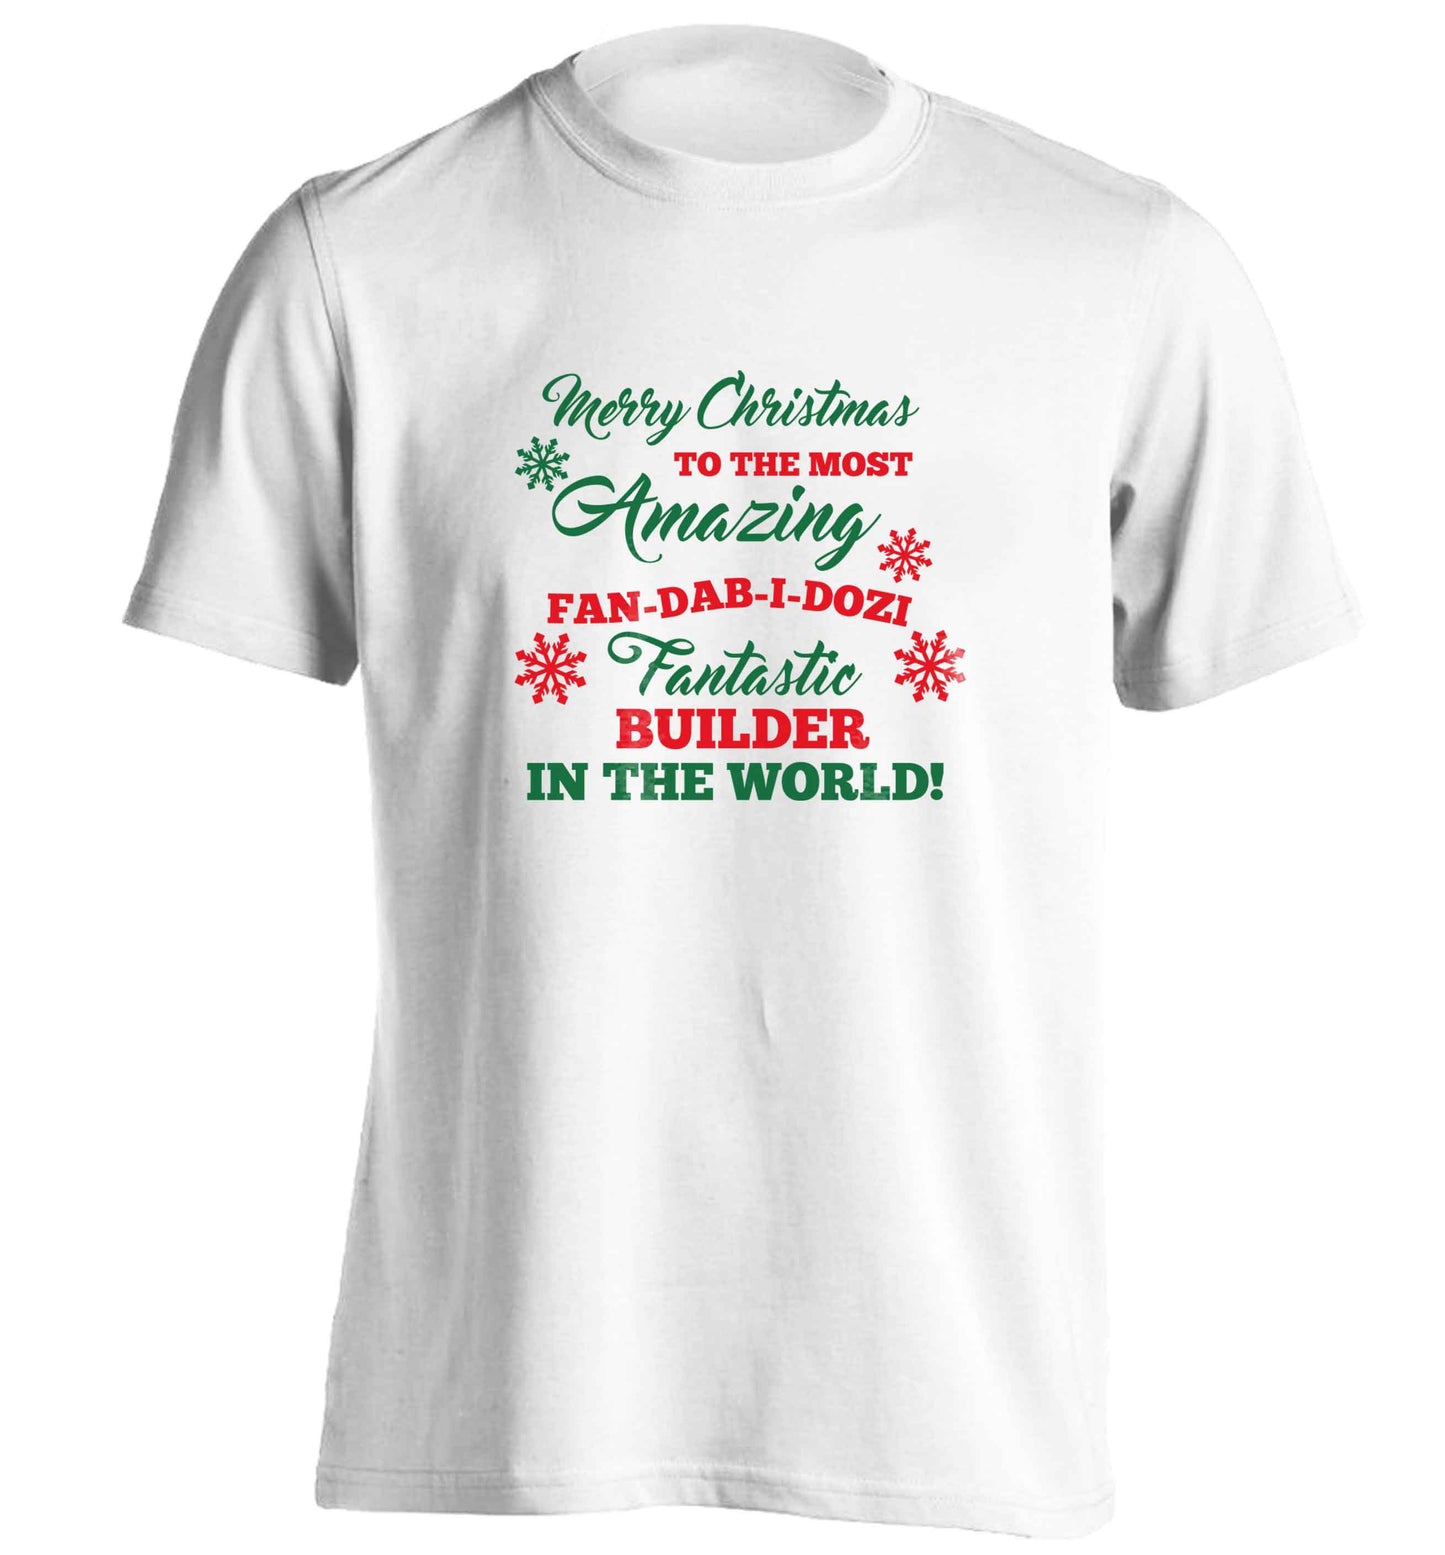 Merry Christmas to the most amazing builder in the world! adults unisex white Tshirt 2XL